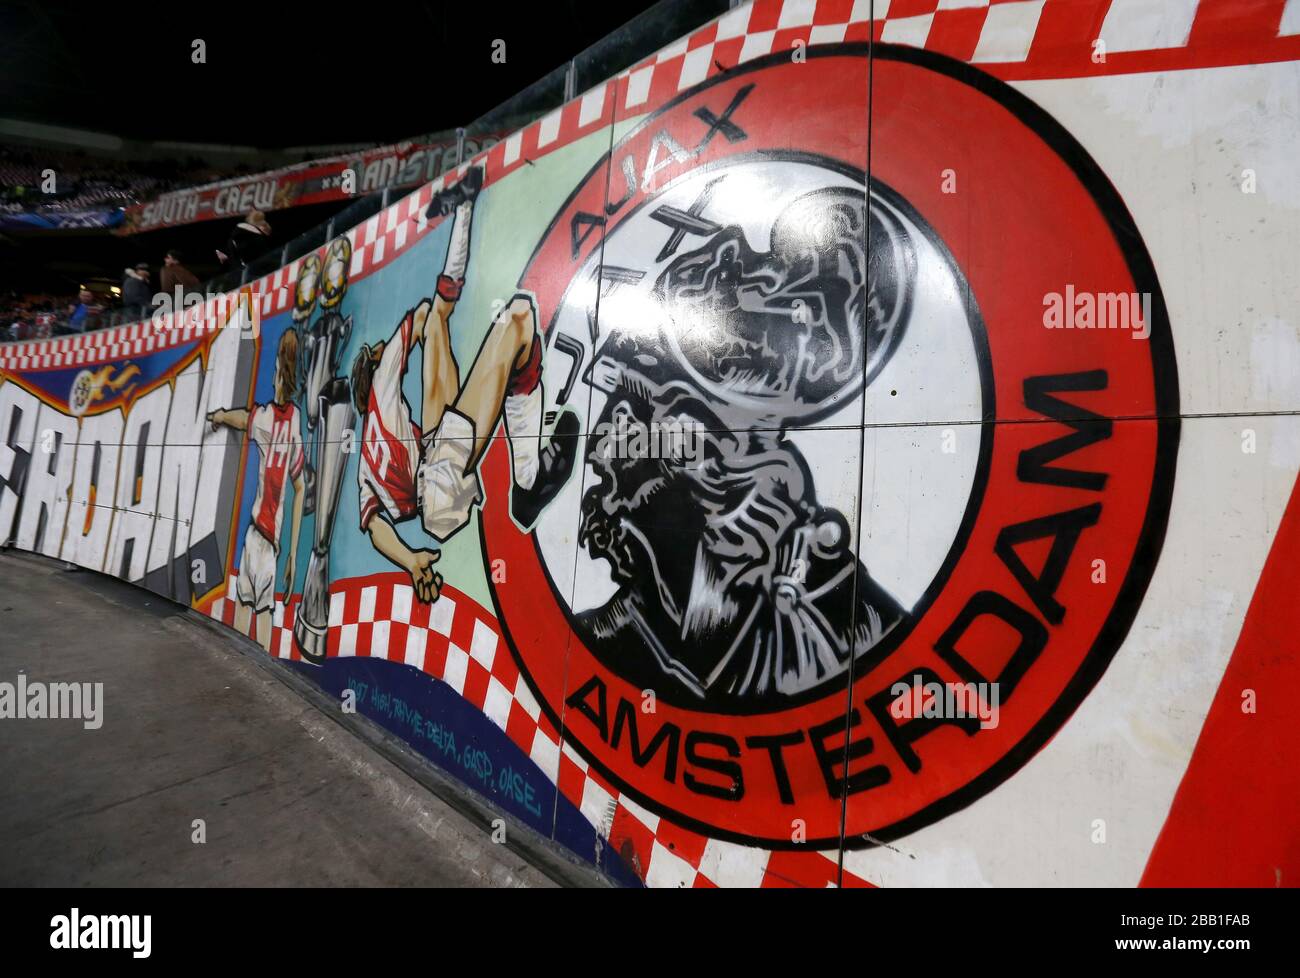 General view of an art mural painted around the Amsterdam Arena. Stock Photo